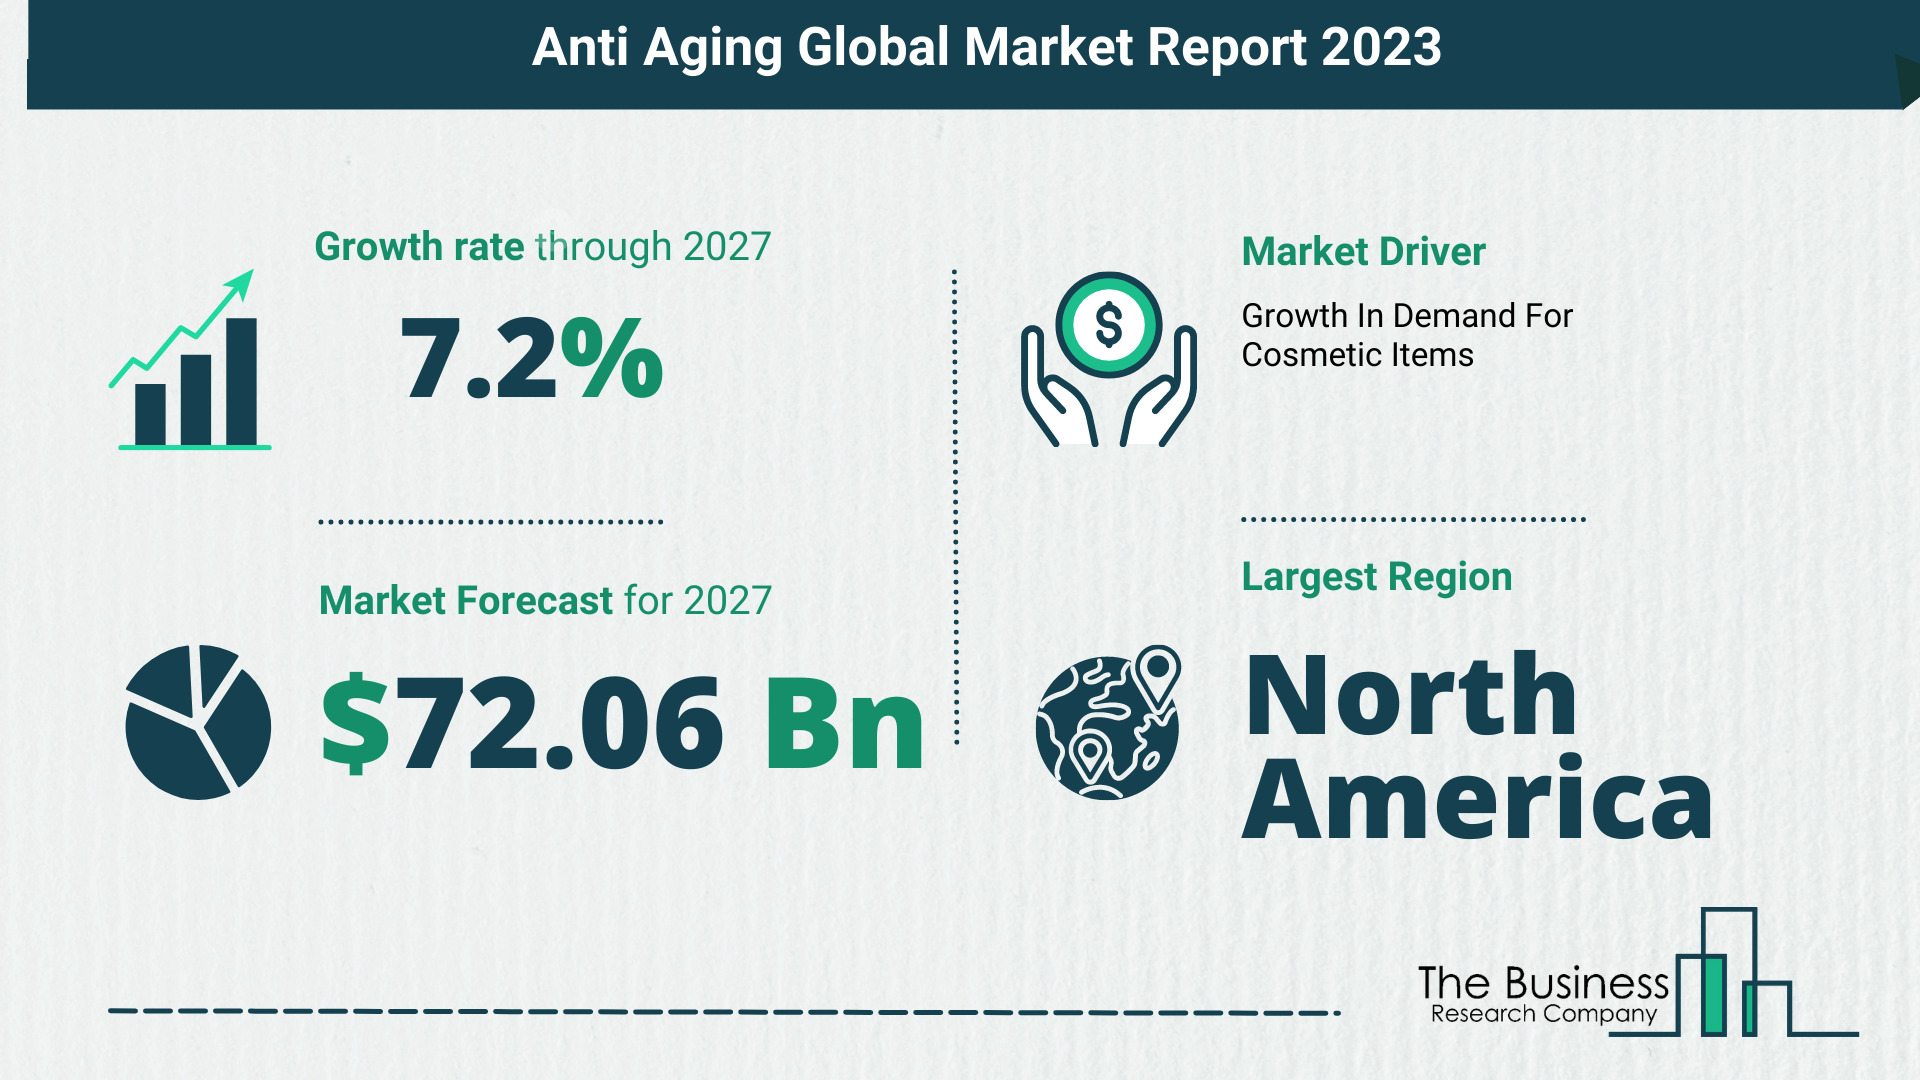 What Is The Forecast Growth Rate For The Anti Aging Market?